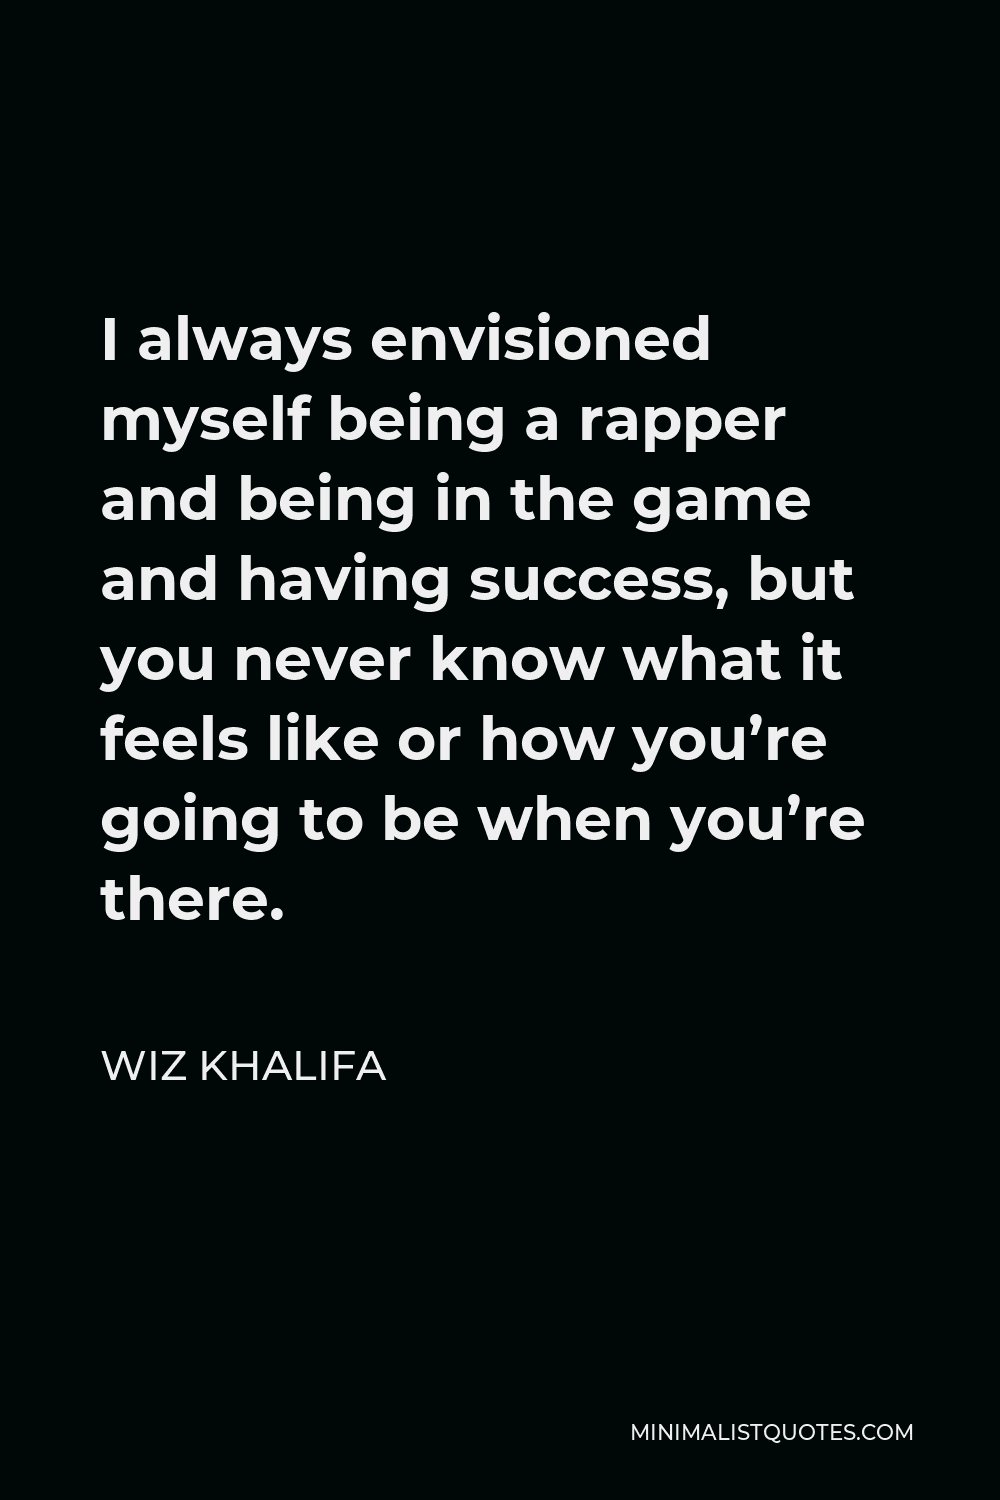 Wiz Khalifa Quote - I always envisioned myself being a rapper and being in the game and having success, but you never know what it feels like or how you’re going to be when you’re there.